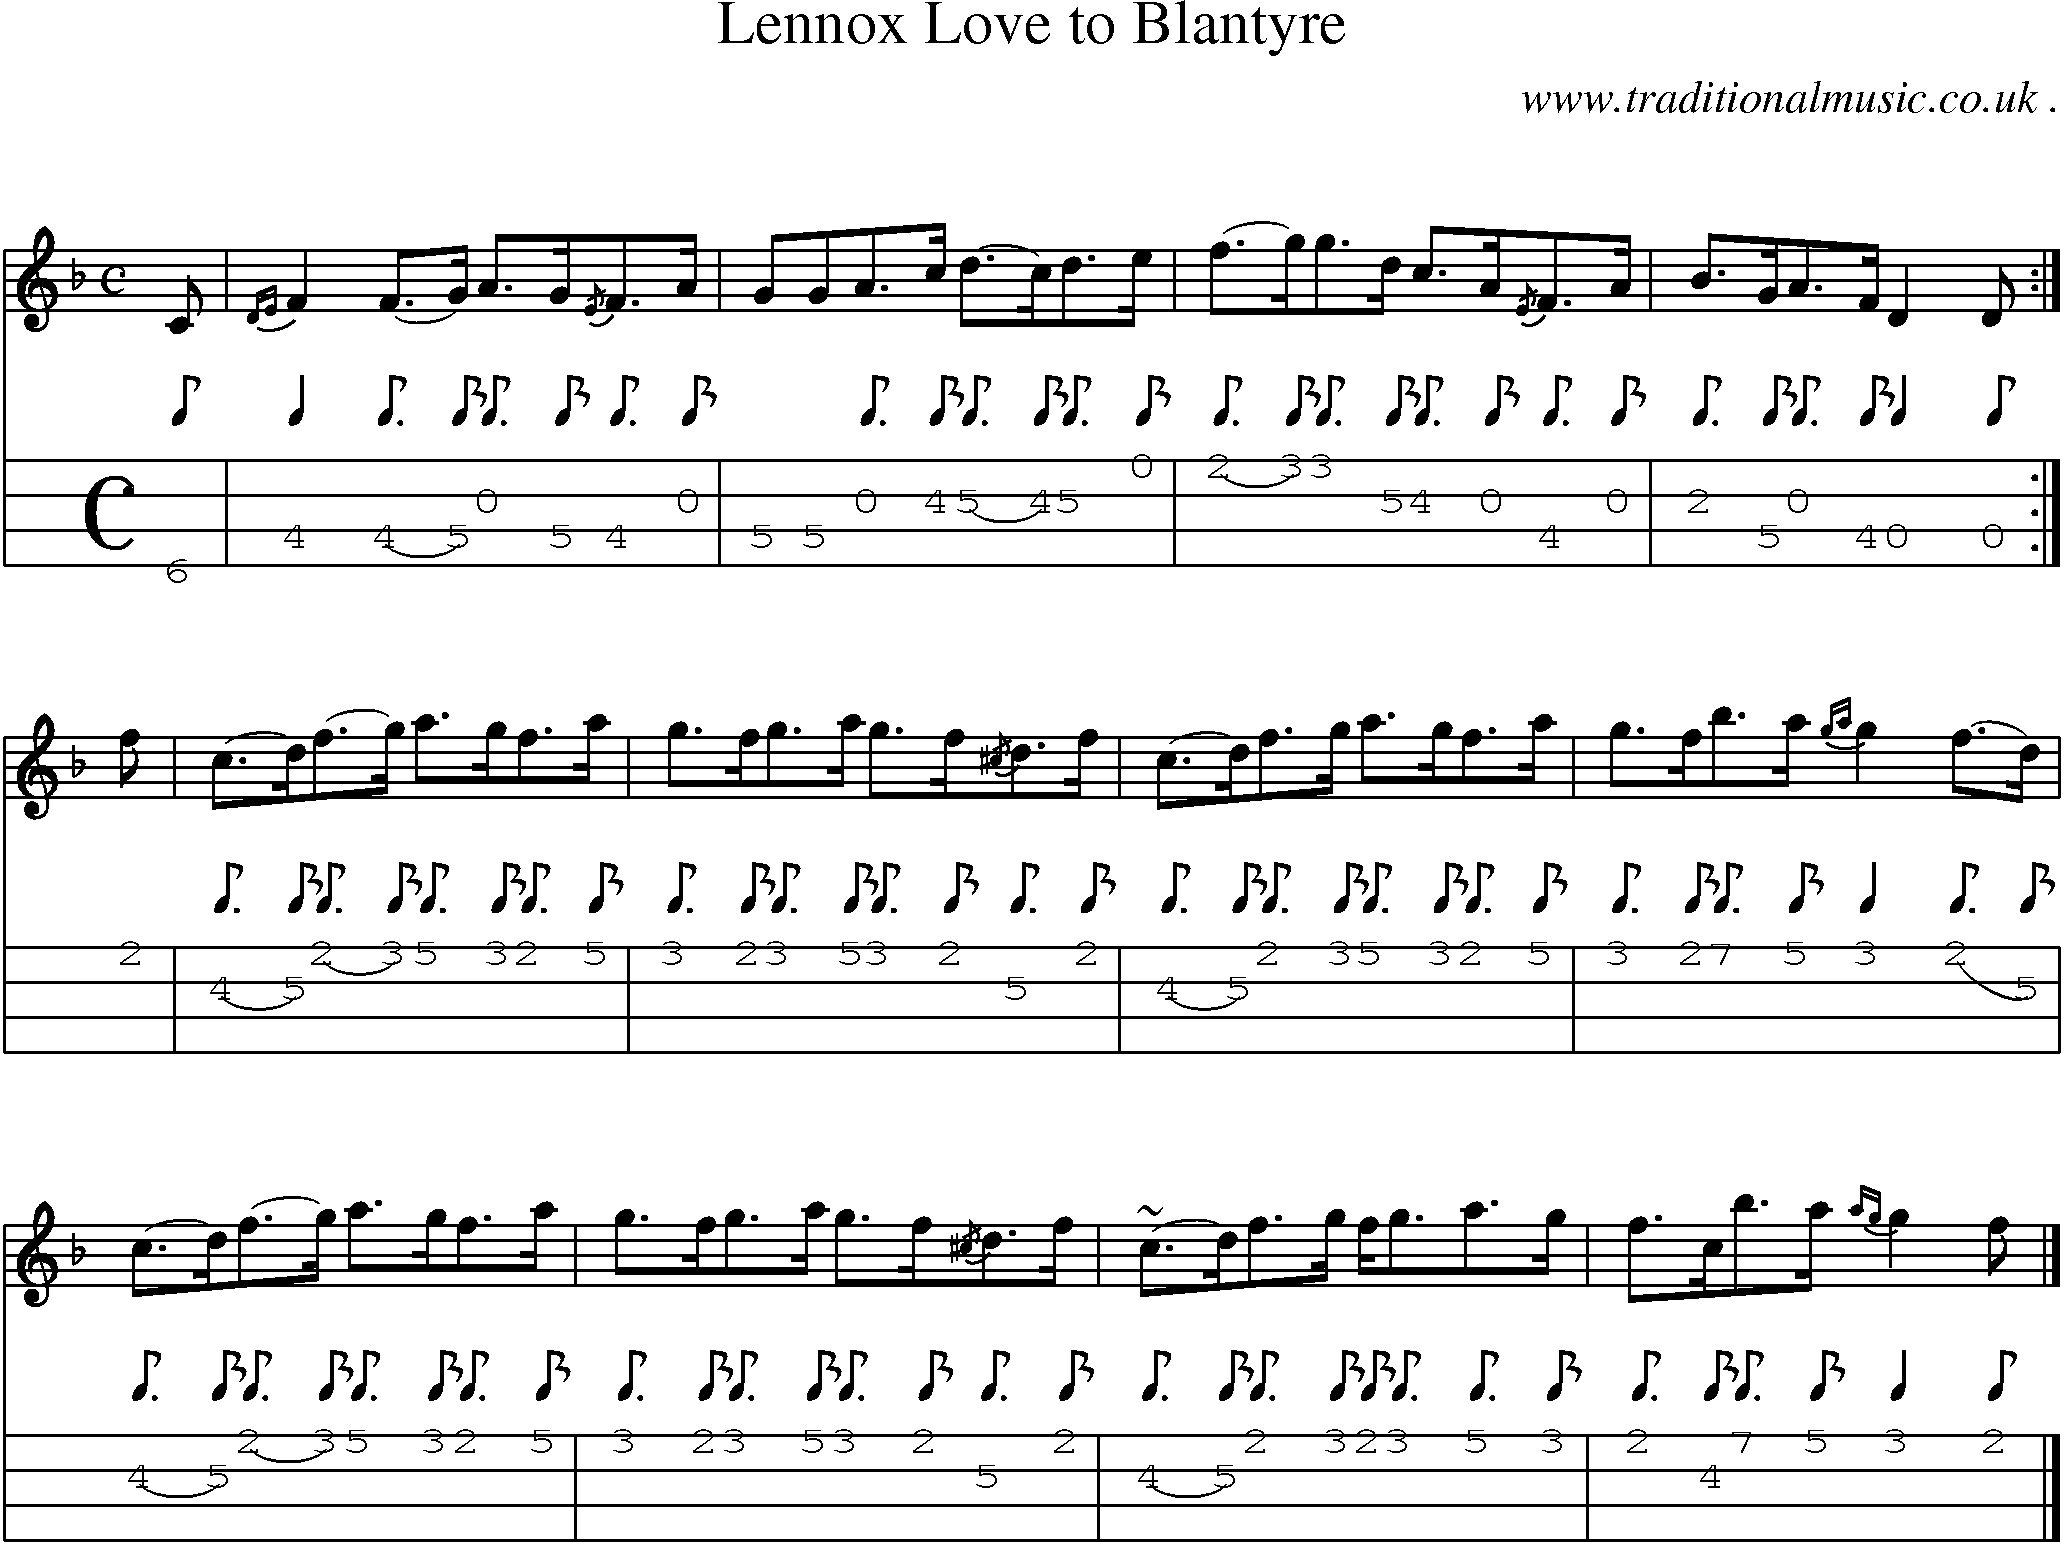 Sheet-music  score, Chords and Mandolin Tabs for Lennox Love To Blantyre